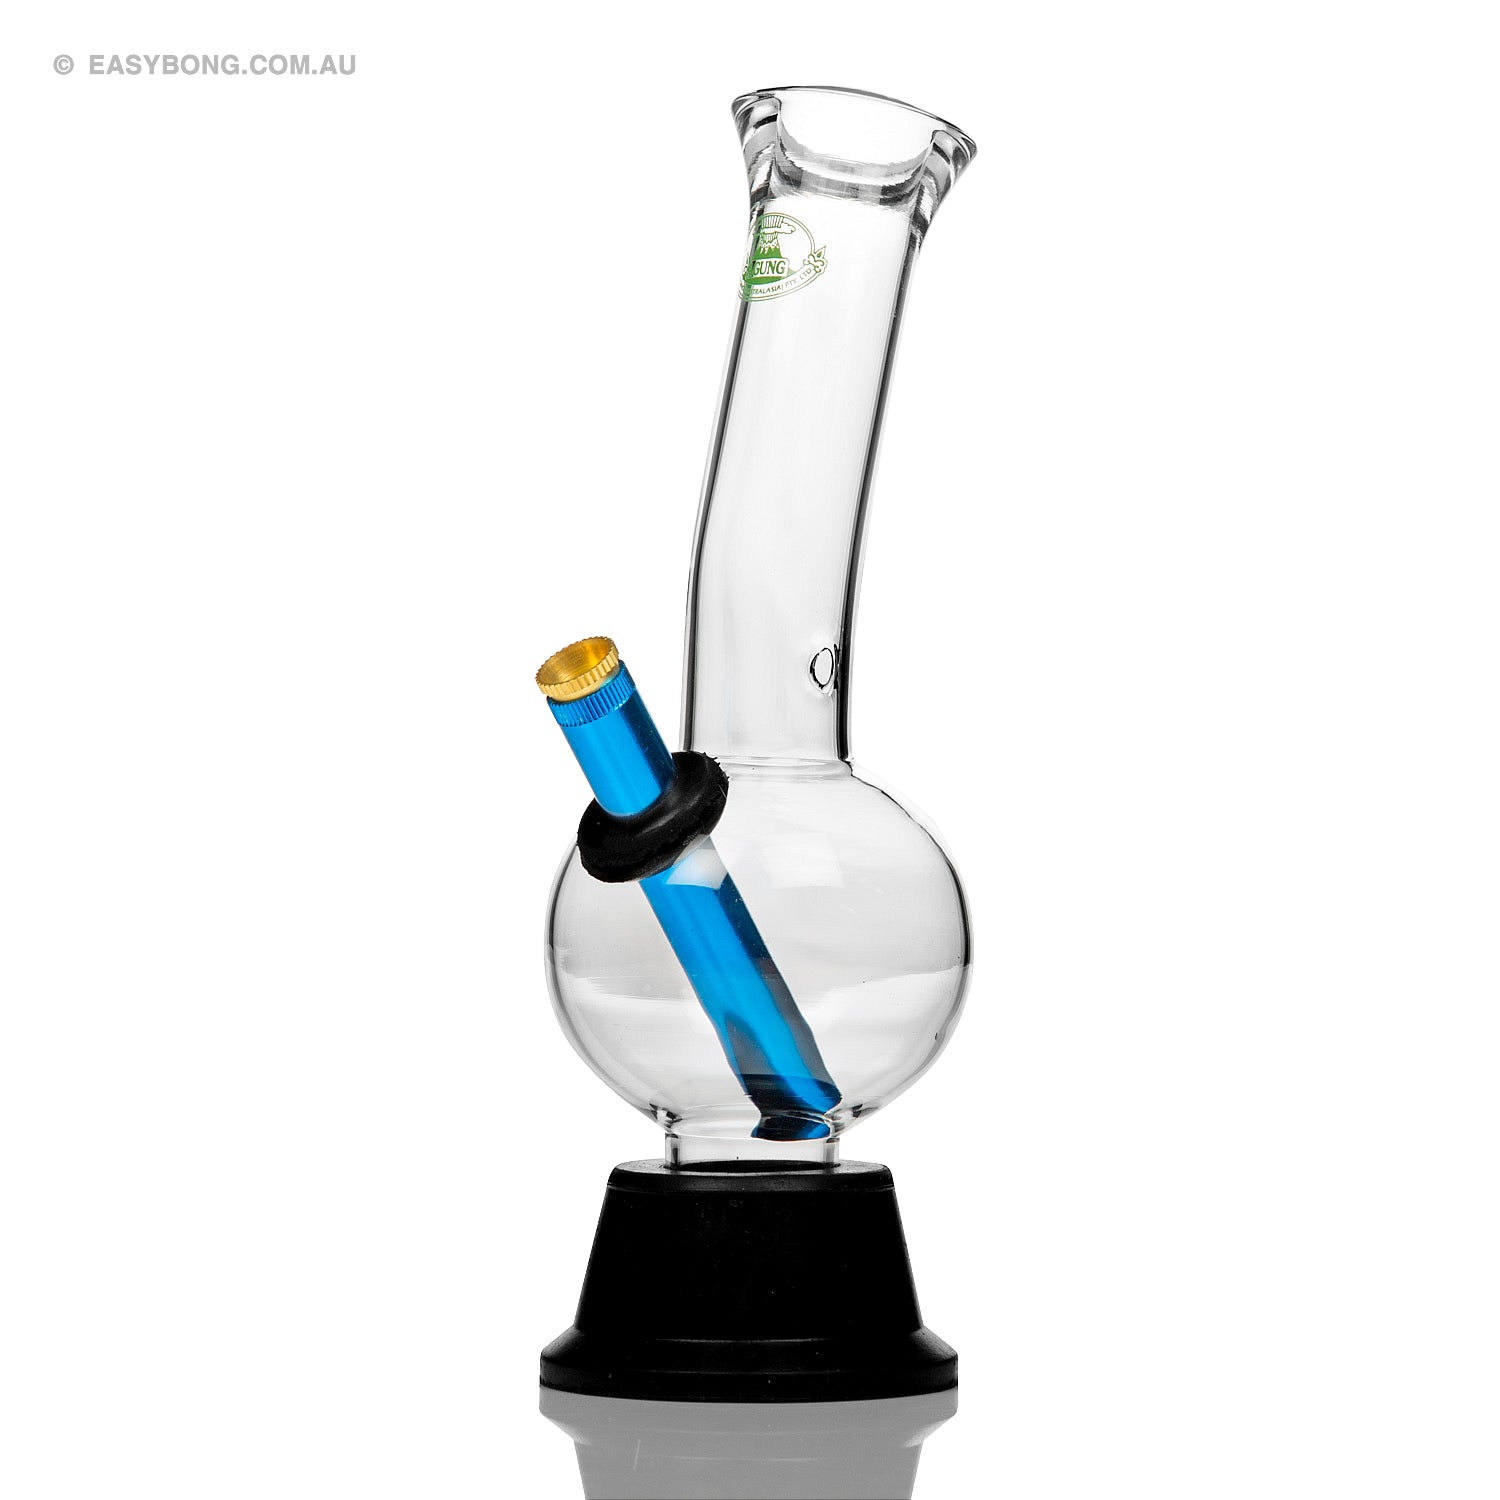 Popular sized Australian bong in a popular size for Aussie stoners